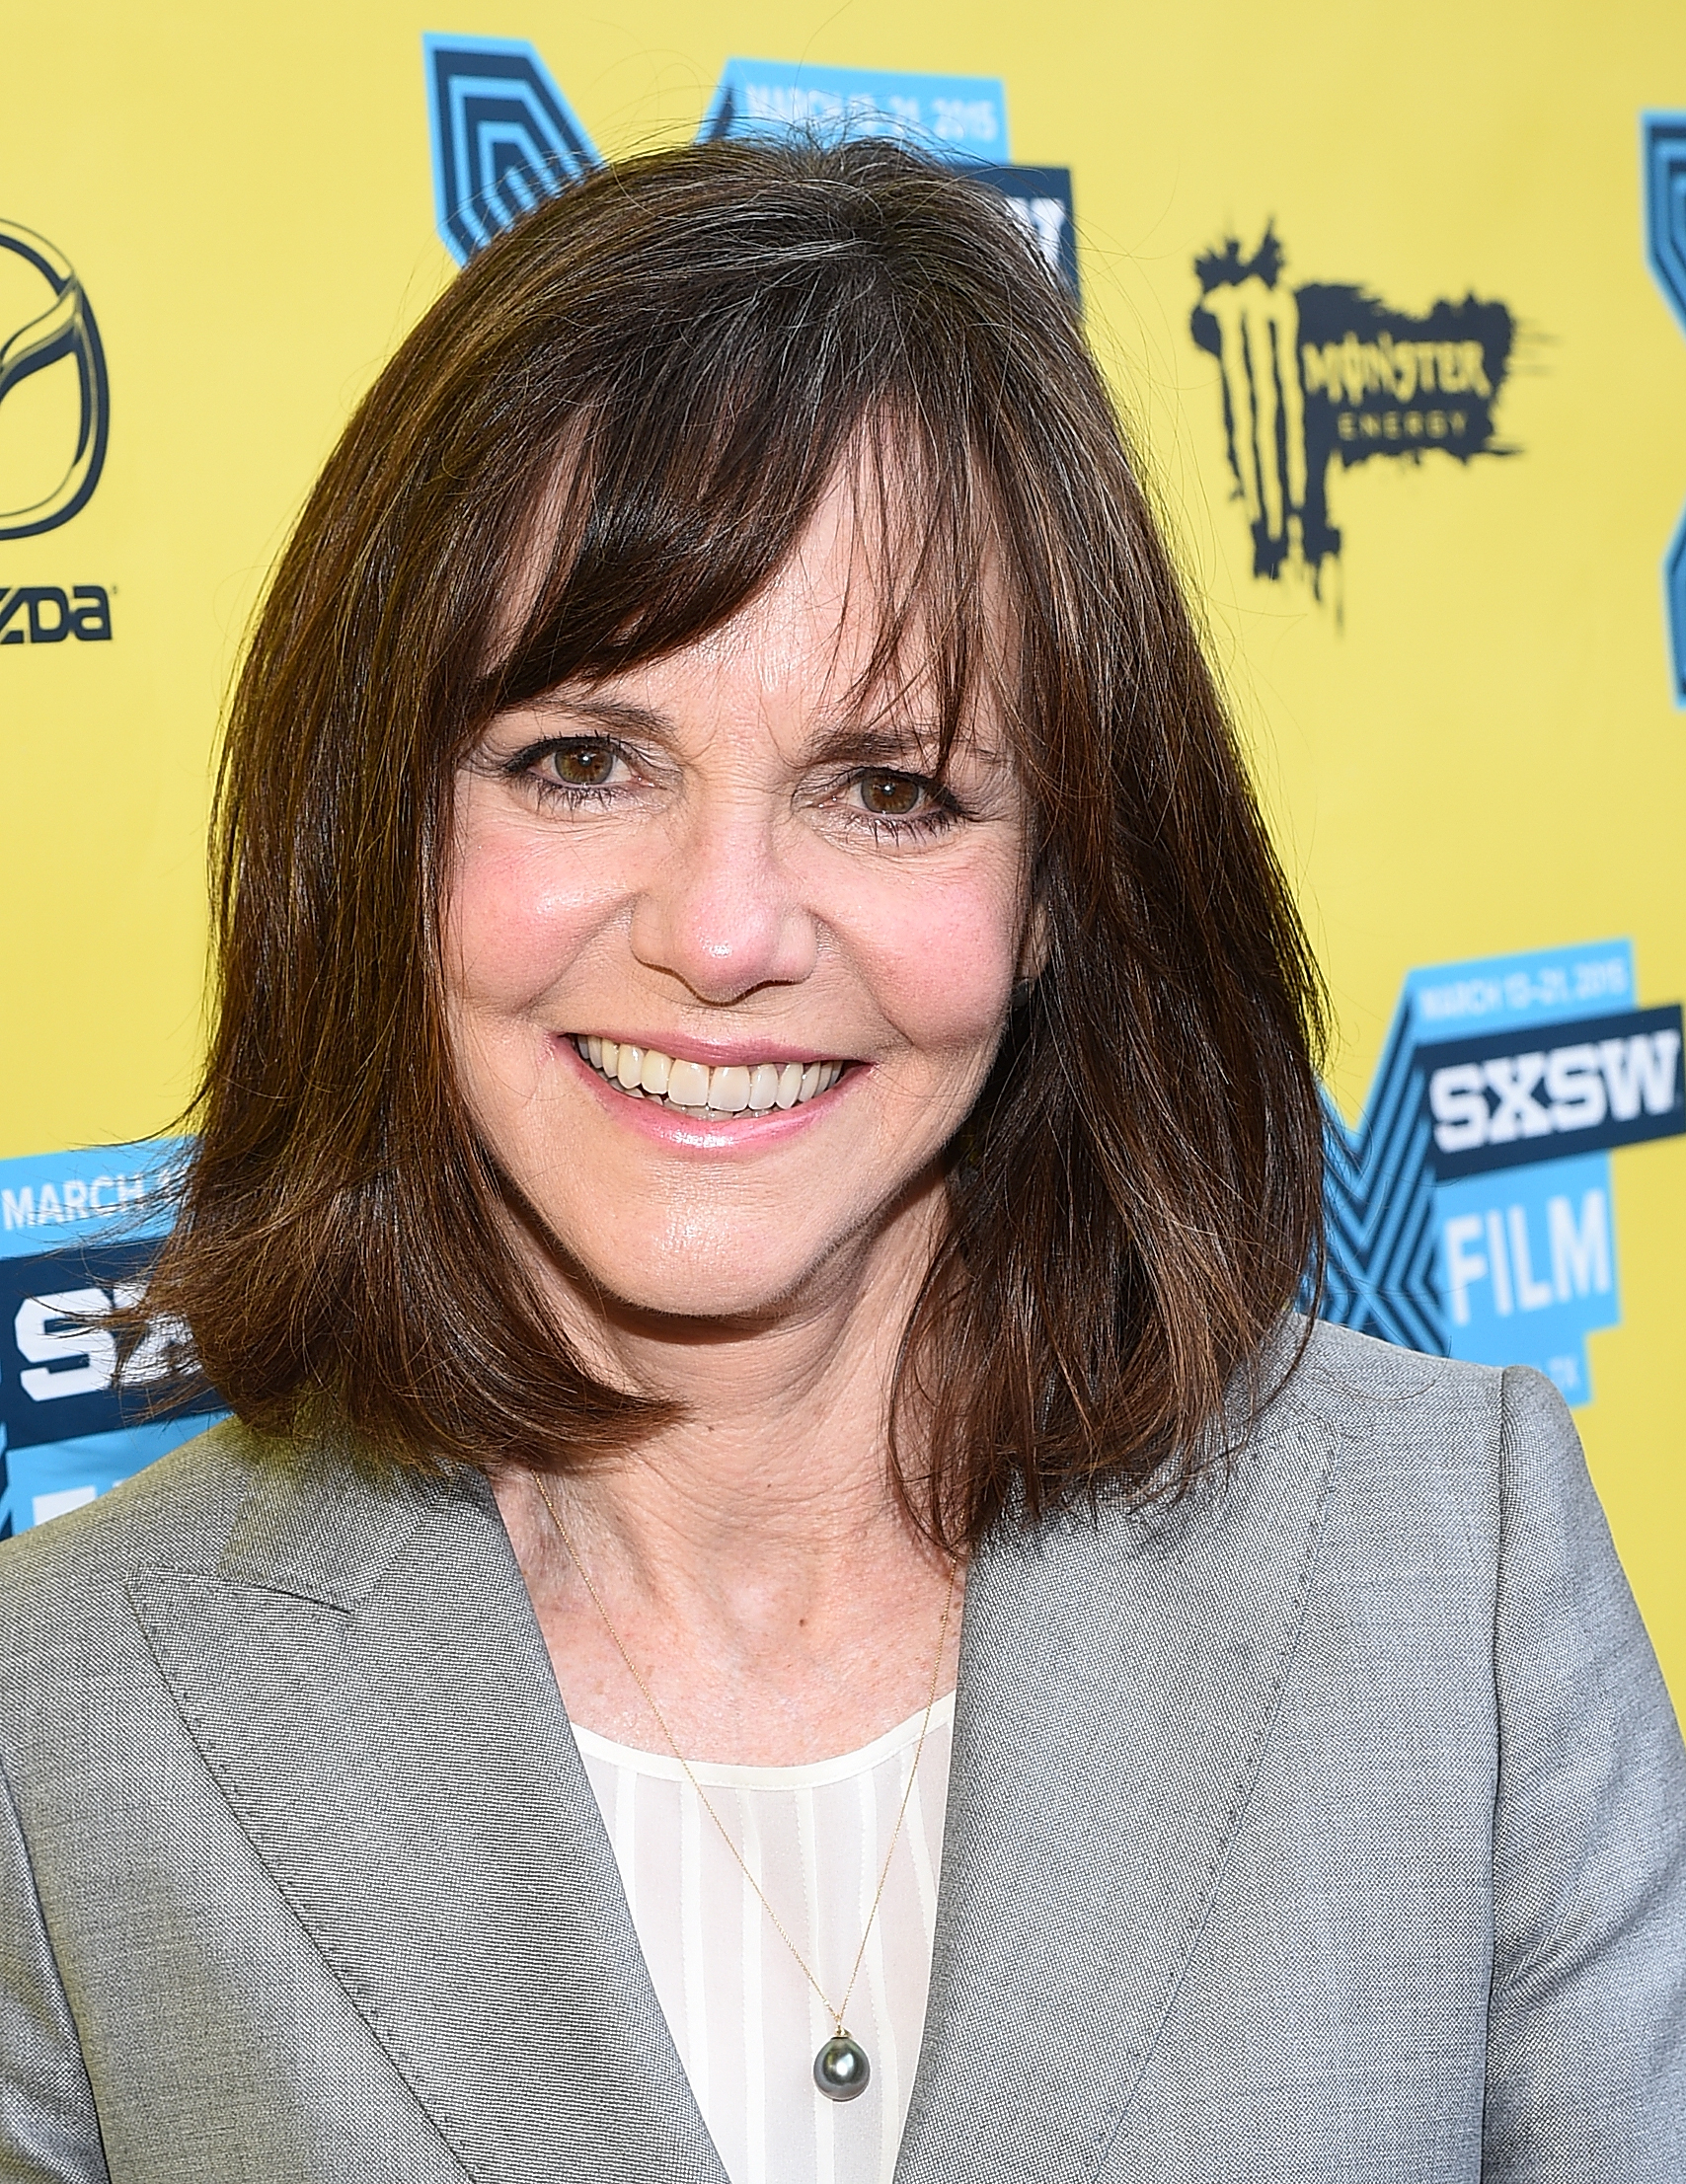 Sally Field attends the "Hello, My Name Is Doris" premiere on March 14, 2015 | Source: Getty Images